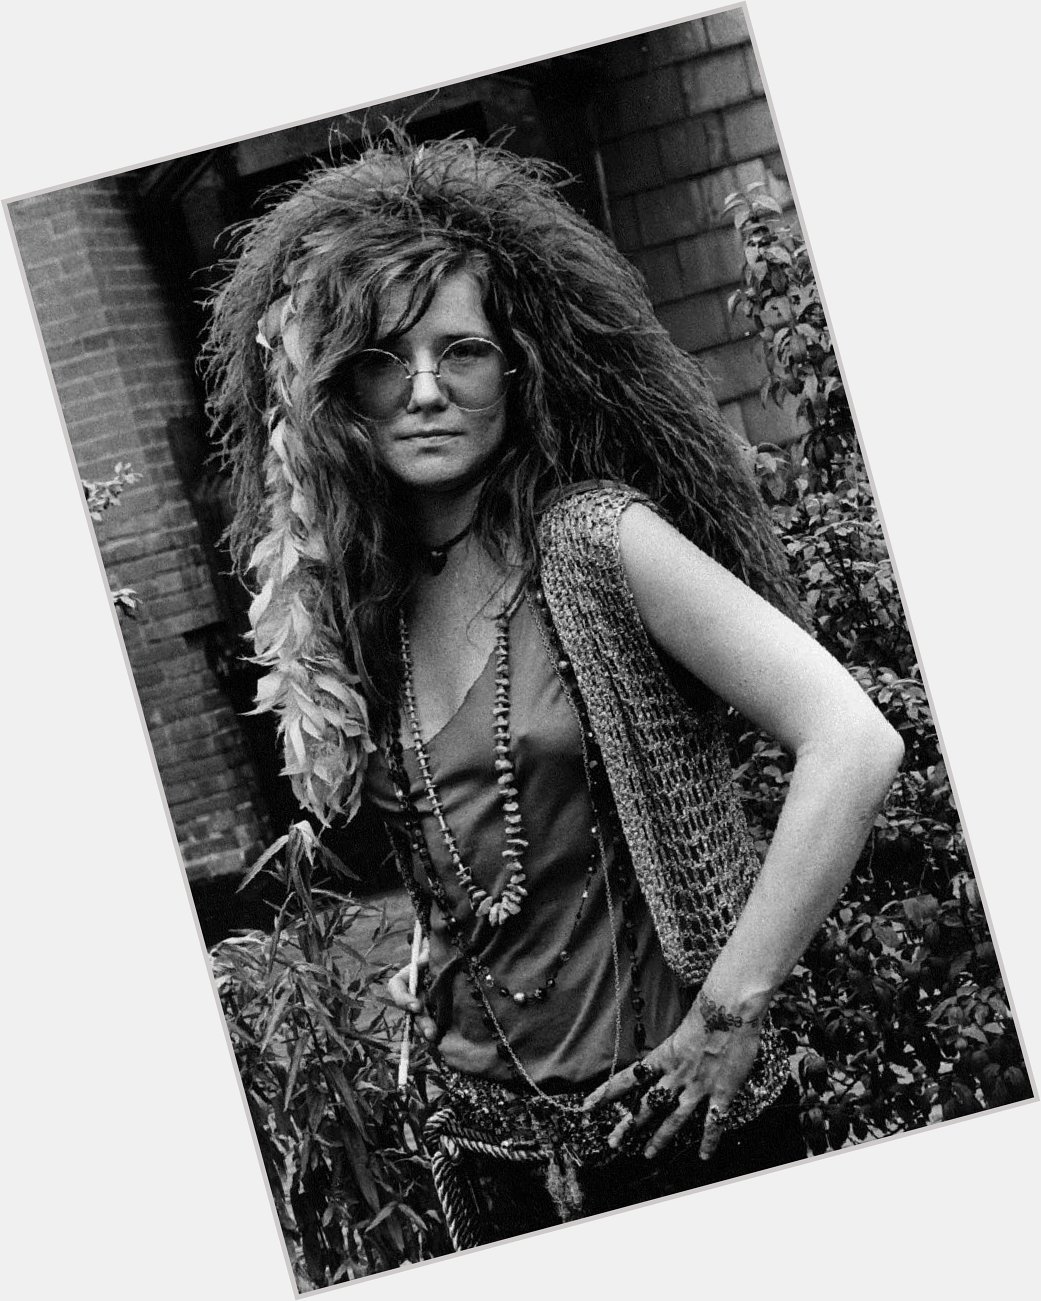 Happy birthday \Janis Joplin\!
Would have been 74 today. 